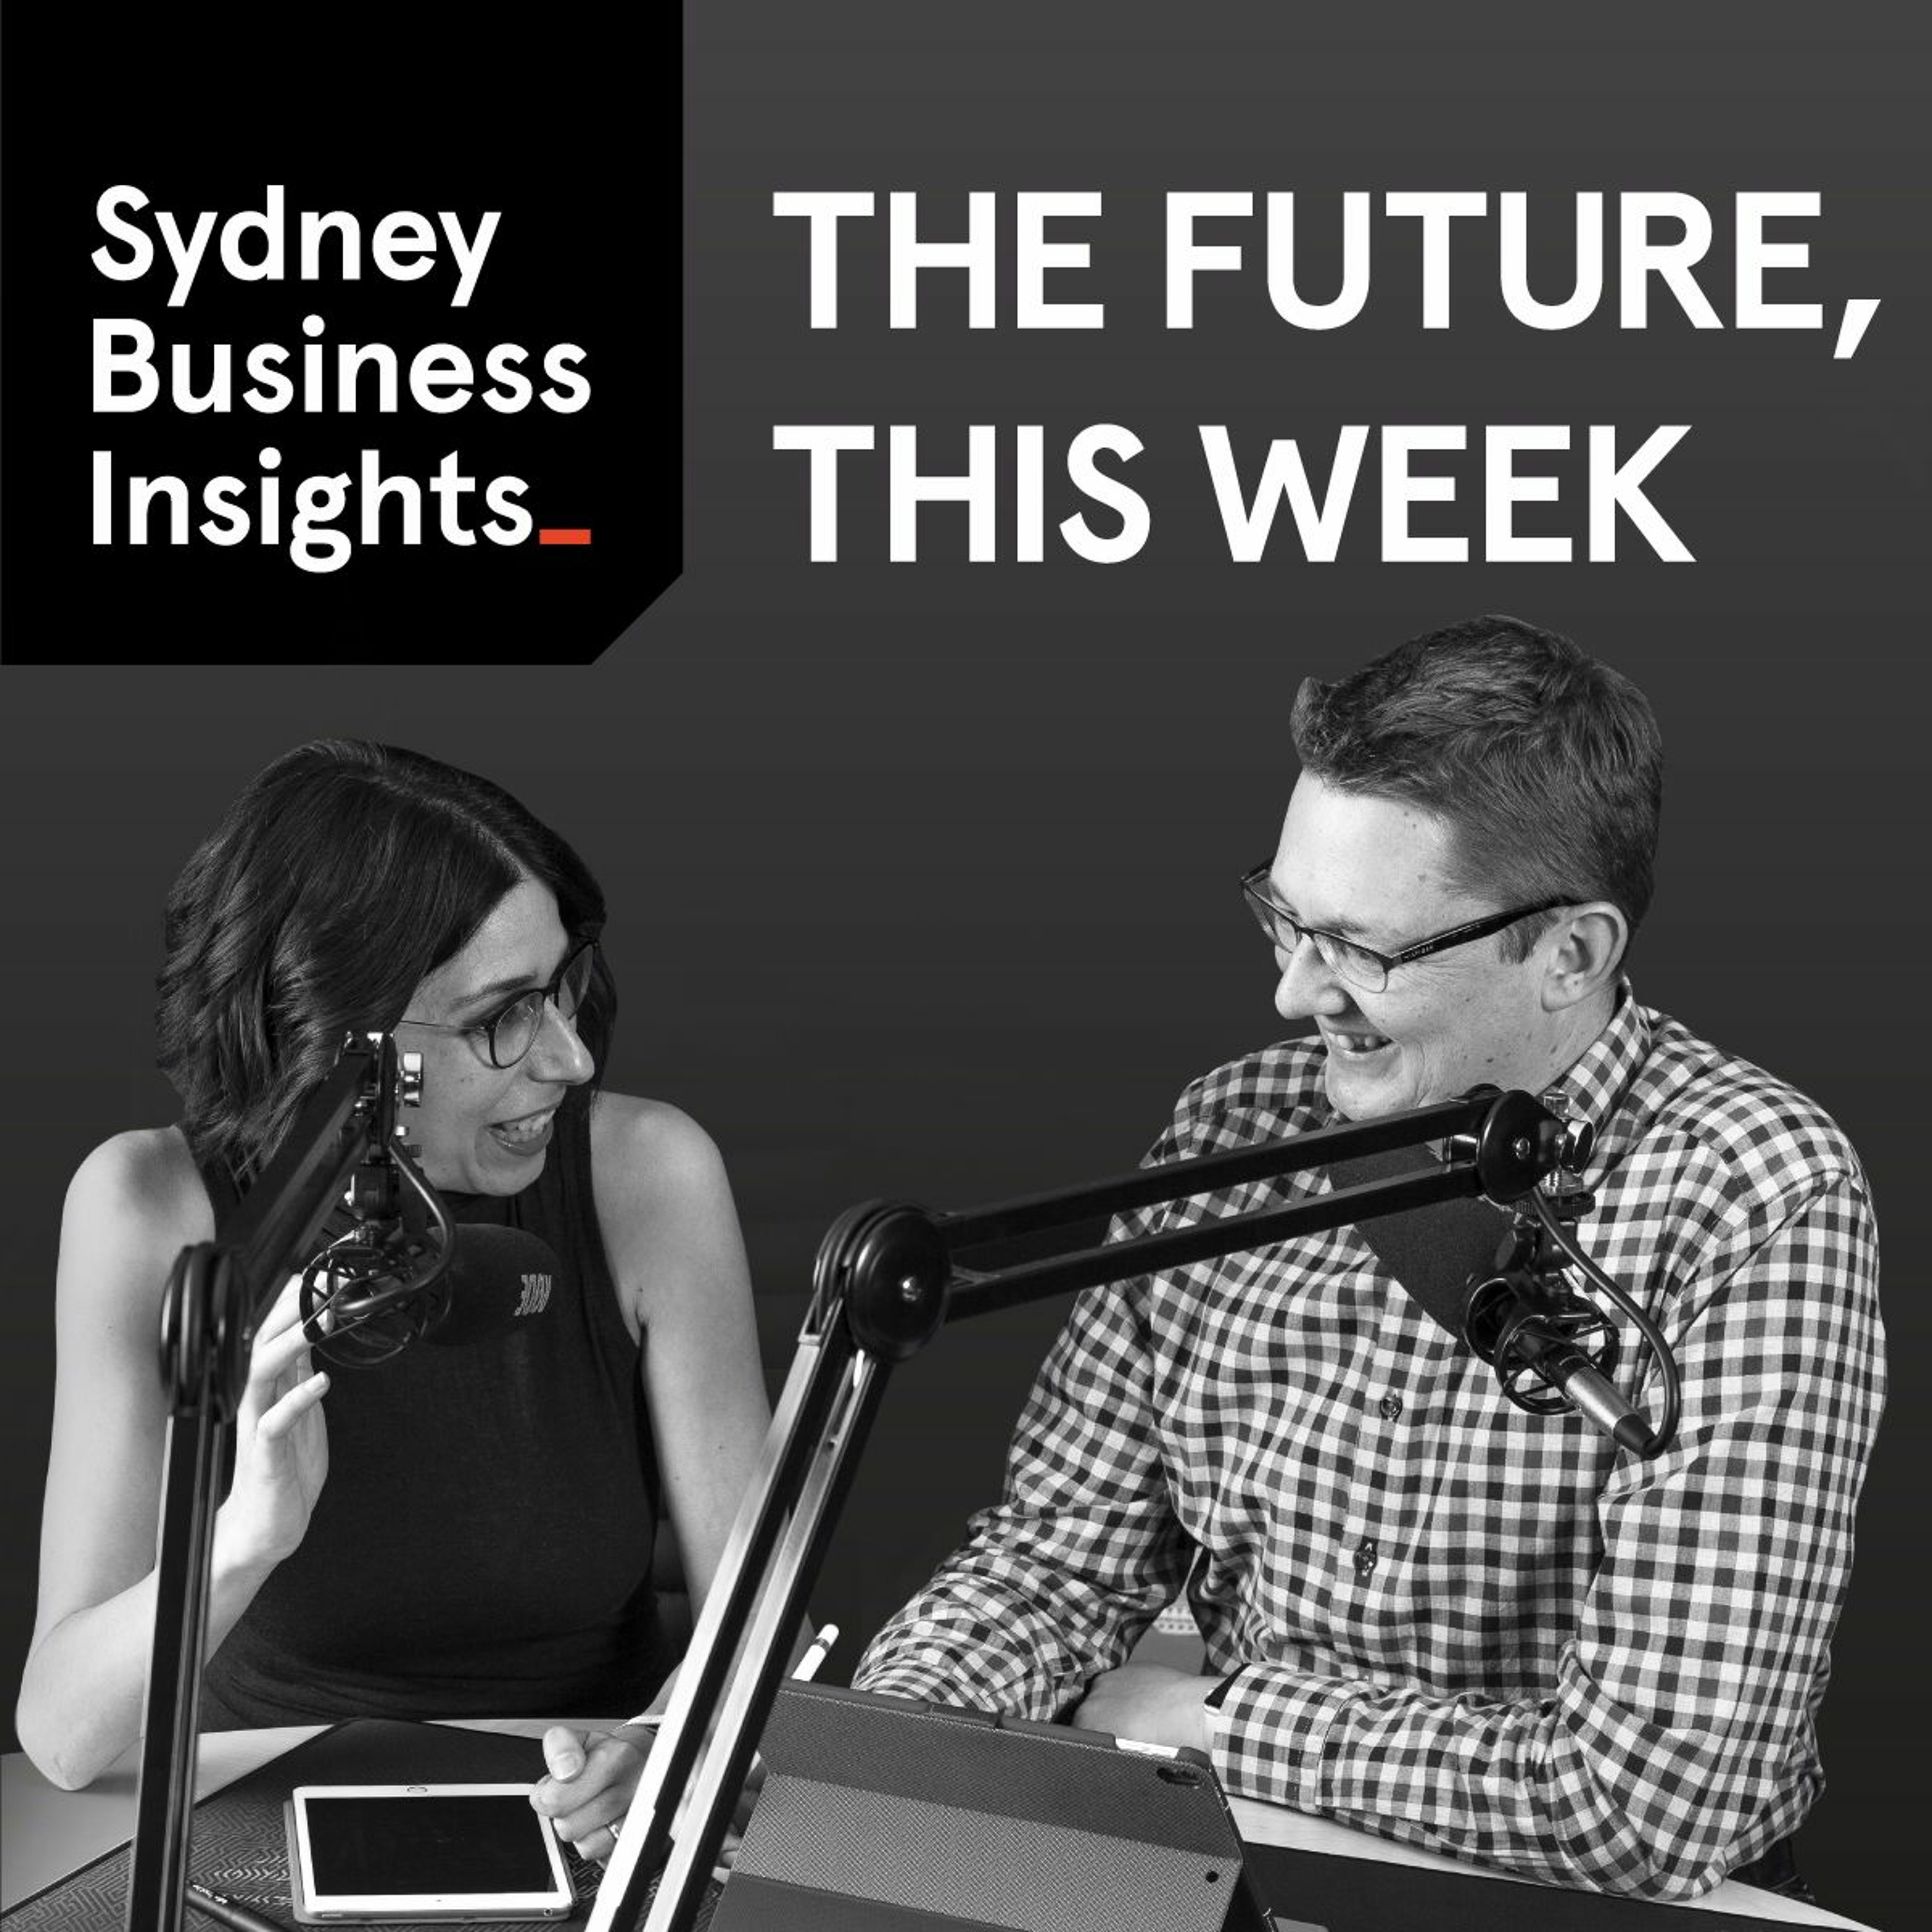 The Future, This Week 29 Sep 2017